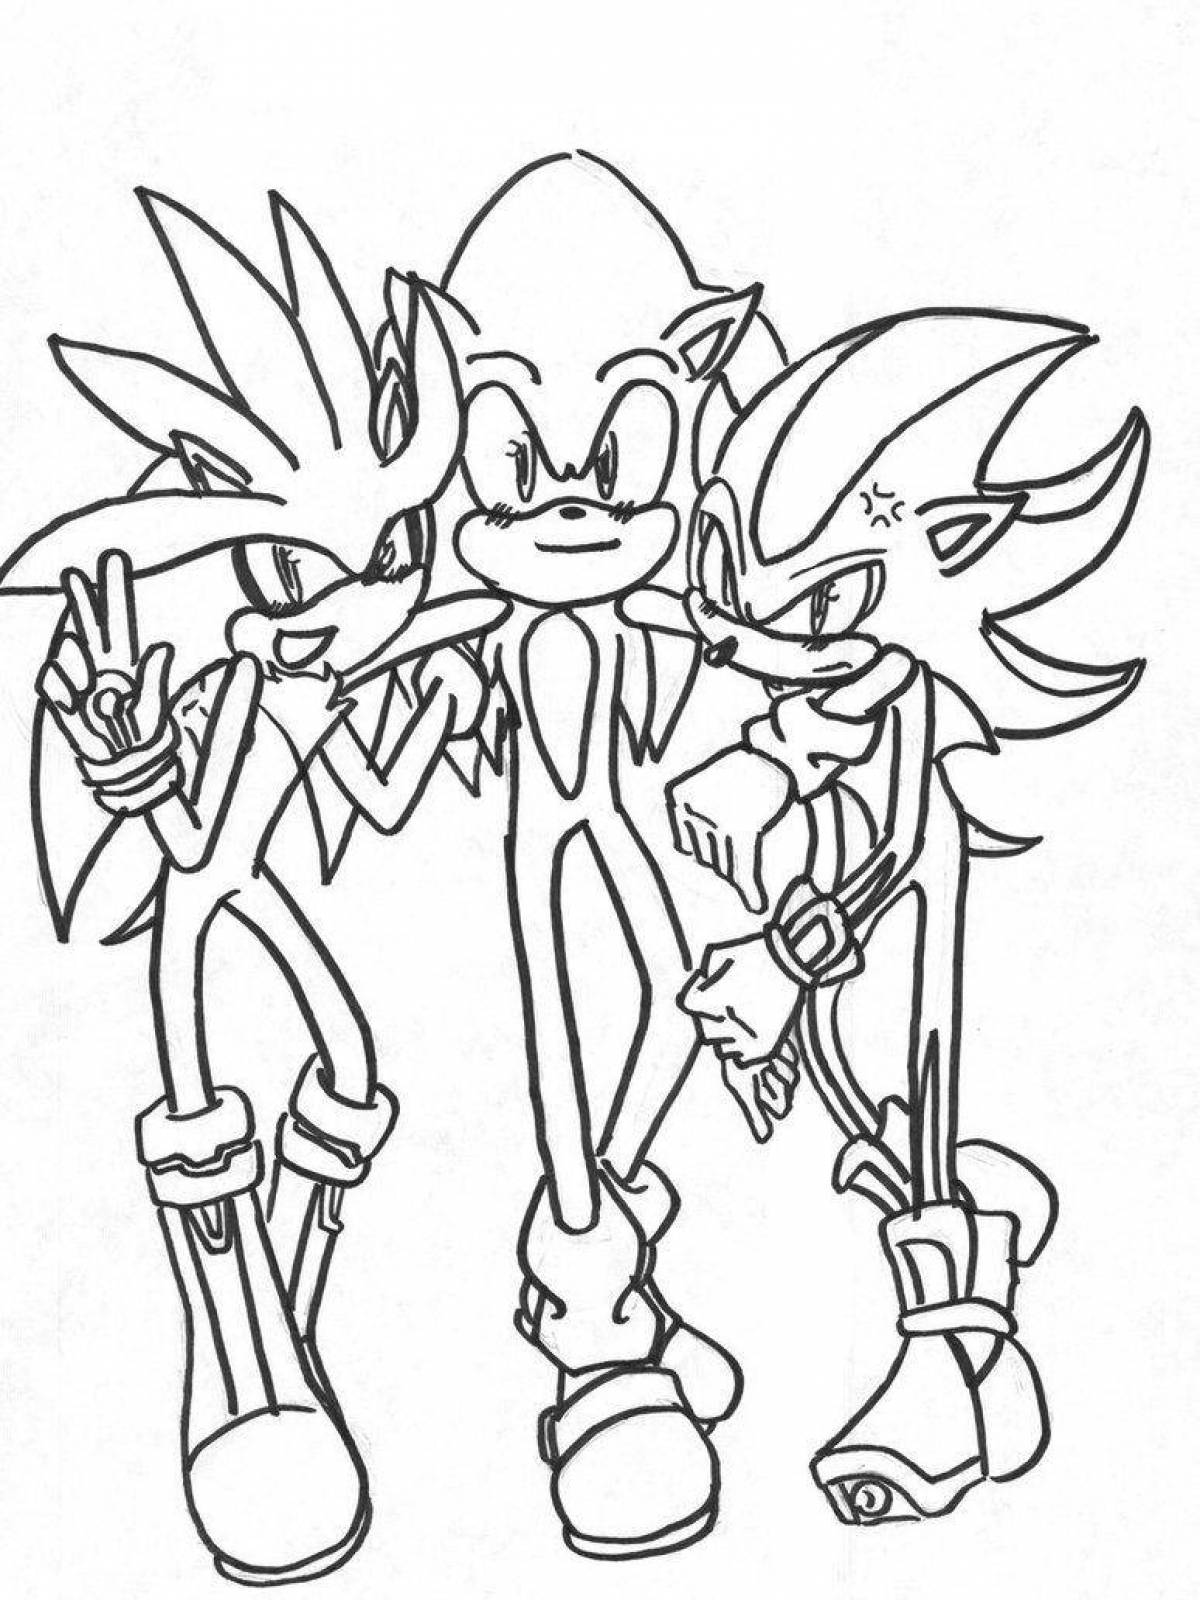 Radiant coloring page sonic silver